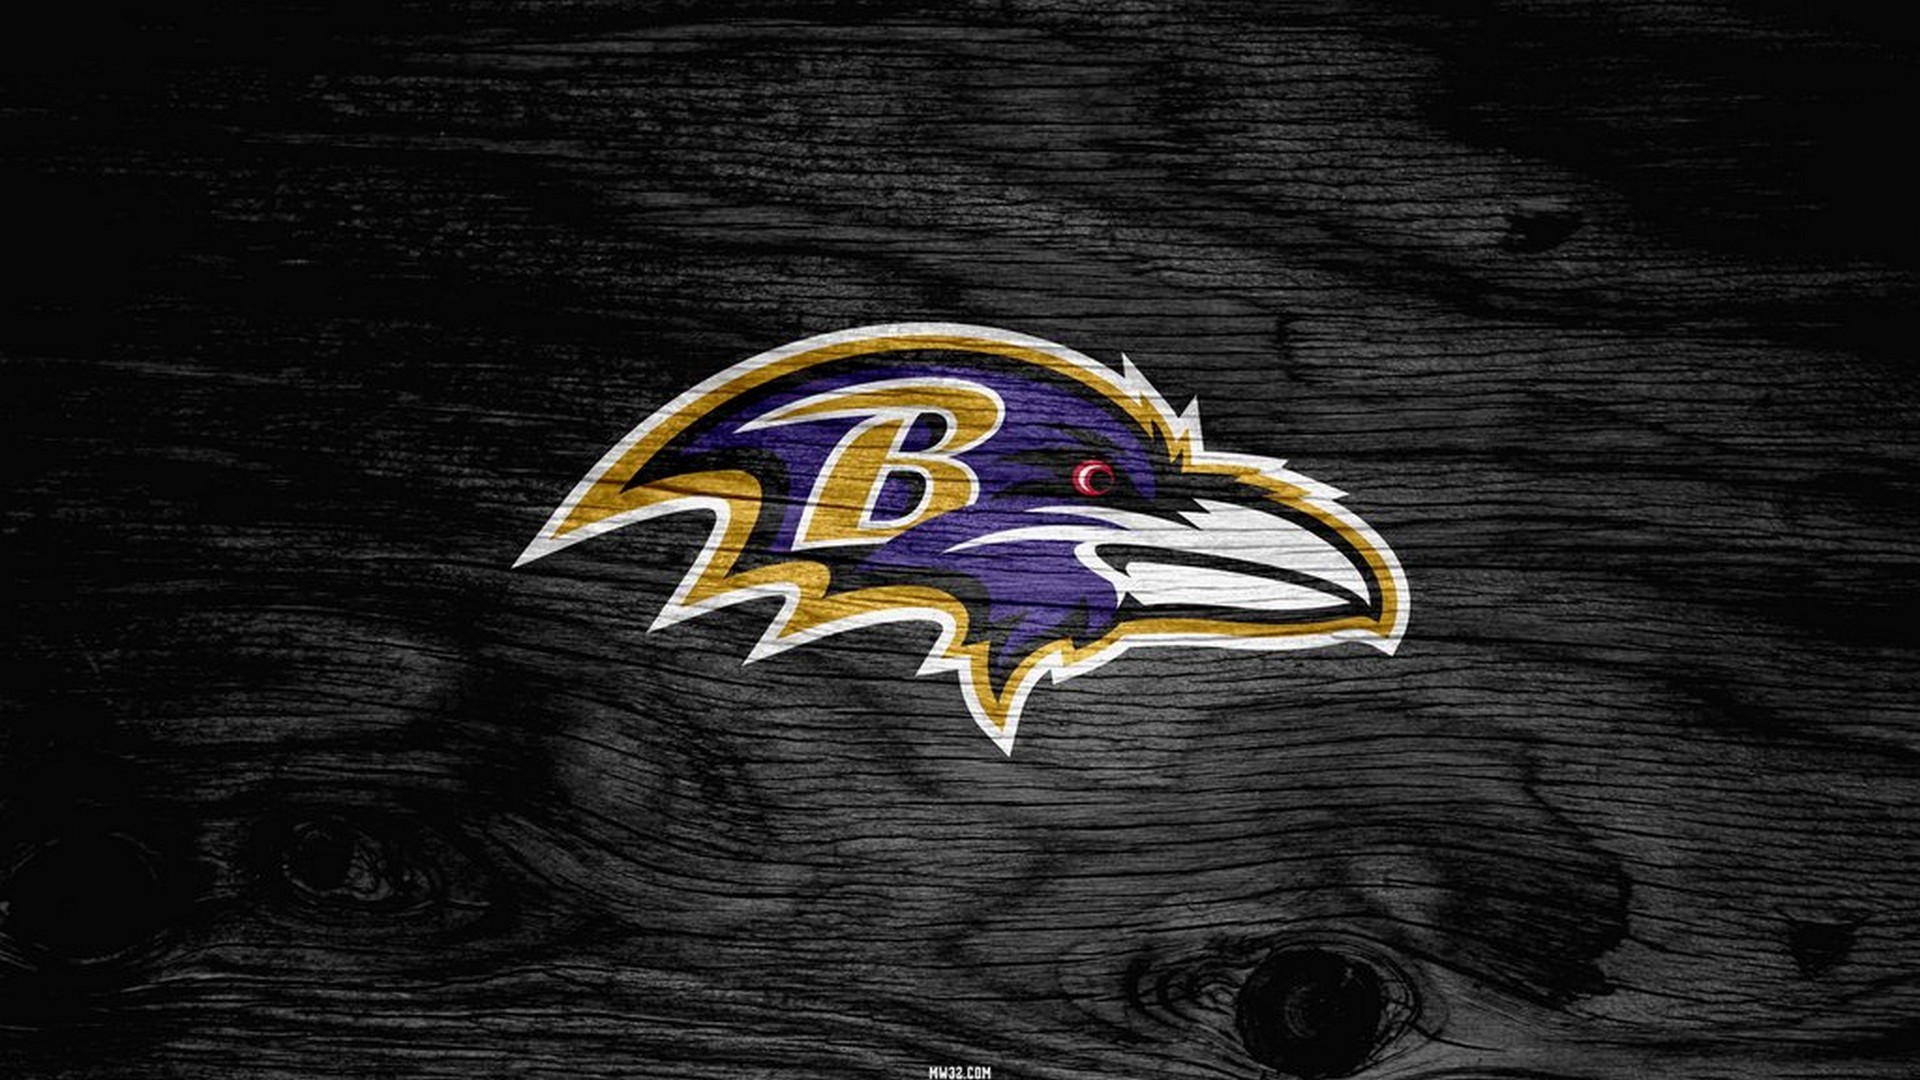 Wallpapers HD Baltimore Ravens With Resolution 1920X1080